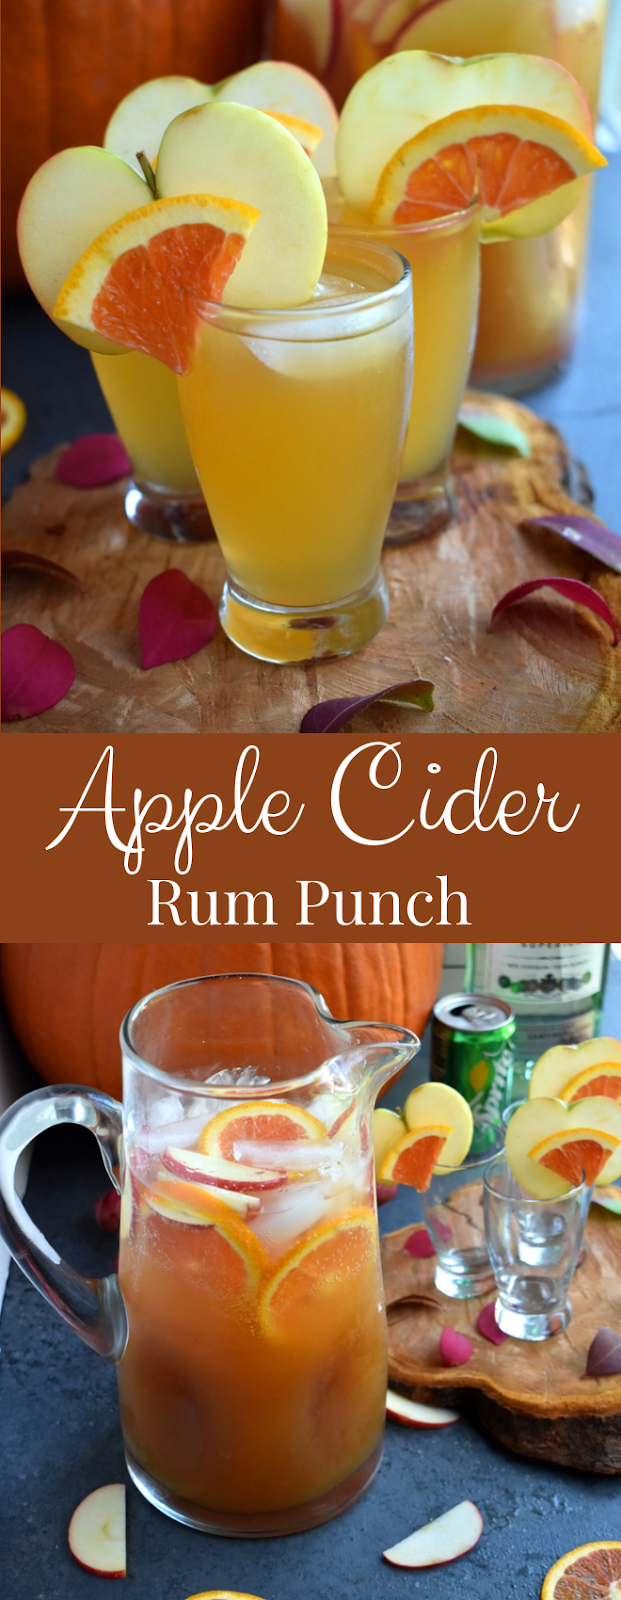 Apple Cider Rum Punch is the perfect easy cocktail with fresh apple cider, rum, honeycrisp apples, oranges and Sprite ready in just a few minutes! www.nutritionistreviews.com